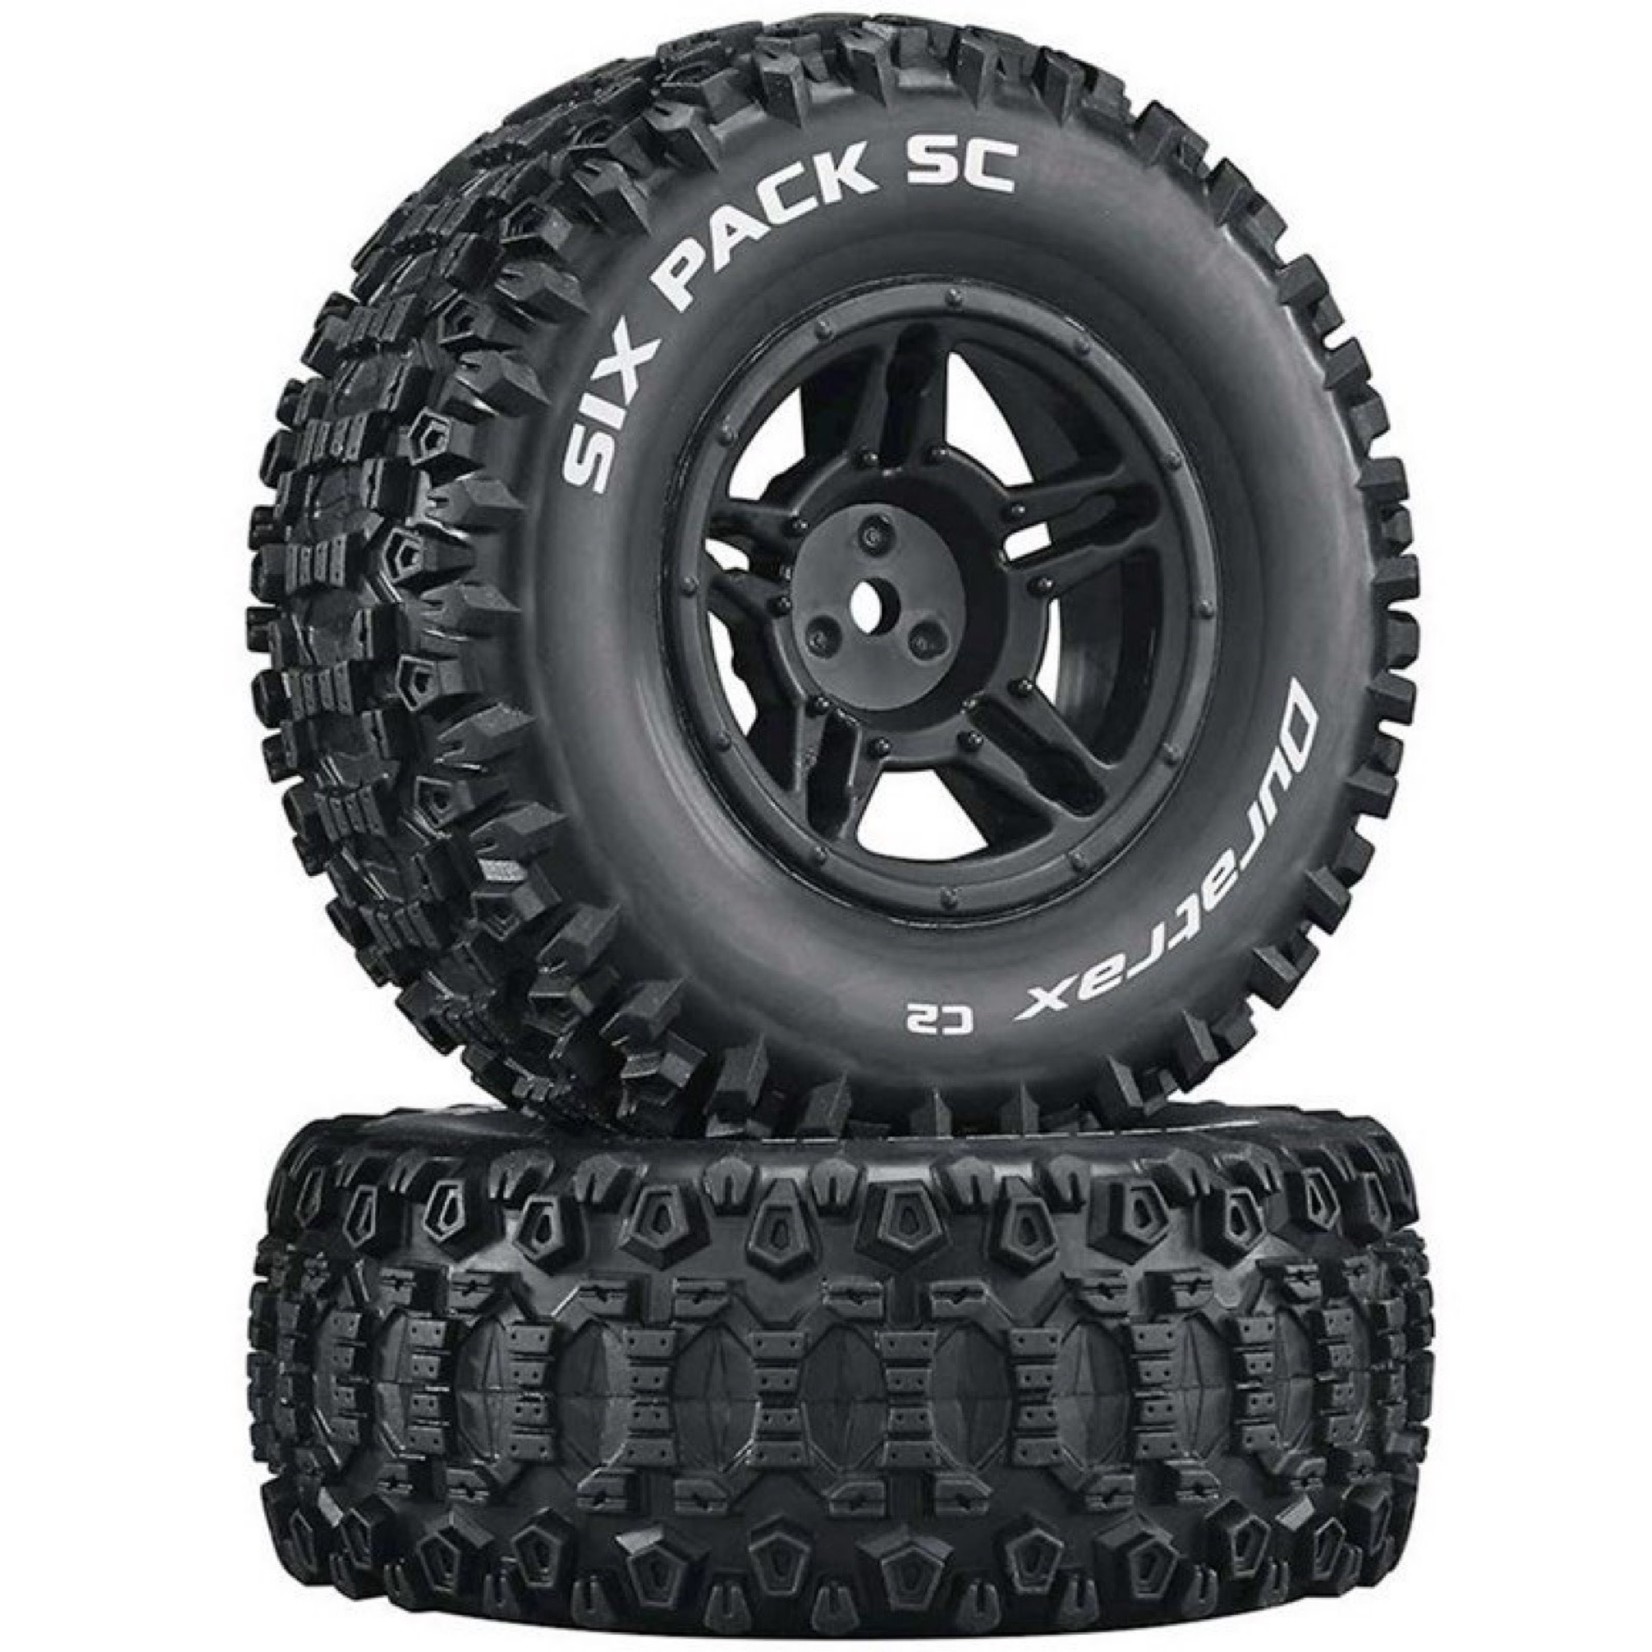 Duratrax DuraTrax Six-Pack Pre-Mounted Short Course Front/Rear Tires (Black) (2) #DTXC3861